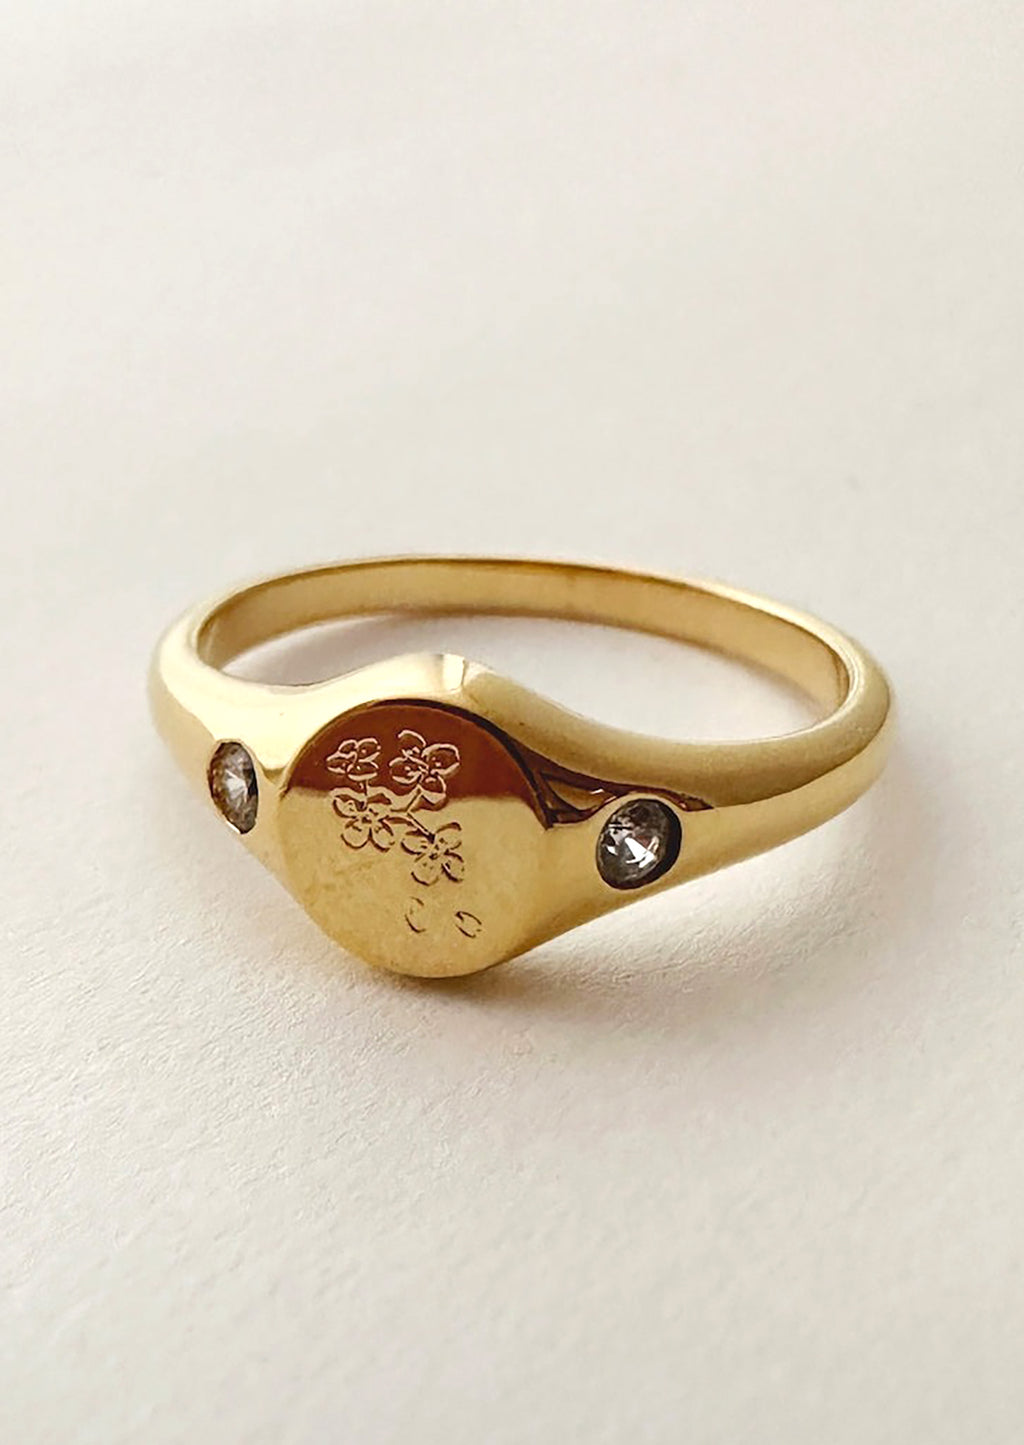 1: A gold signet ring with floral engraving with clear crystal on either side.